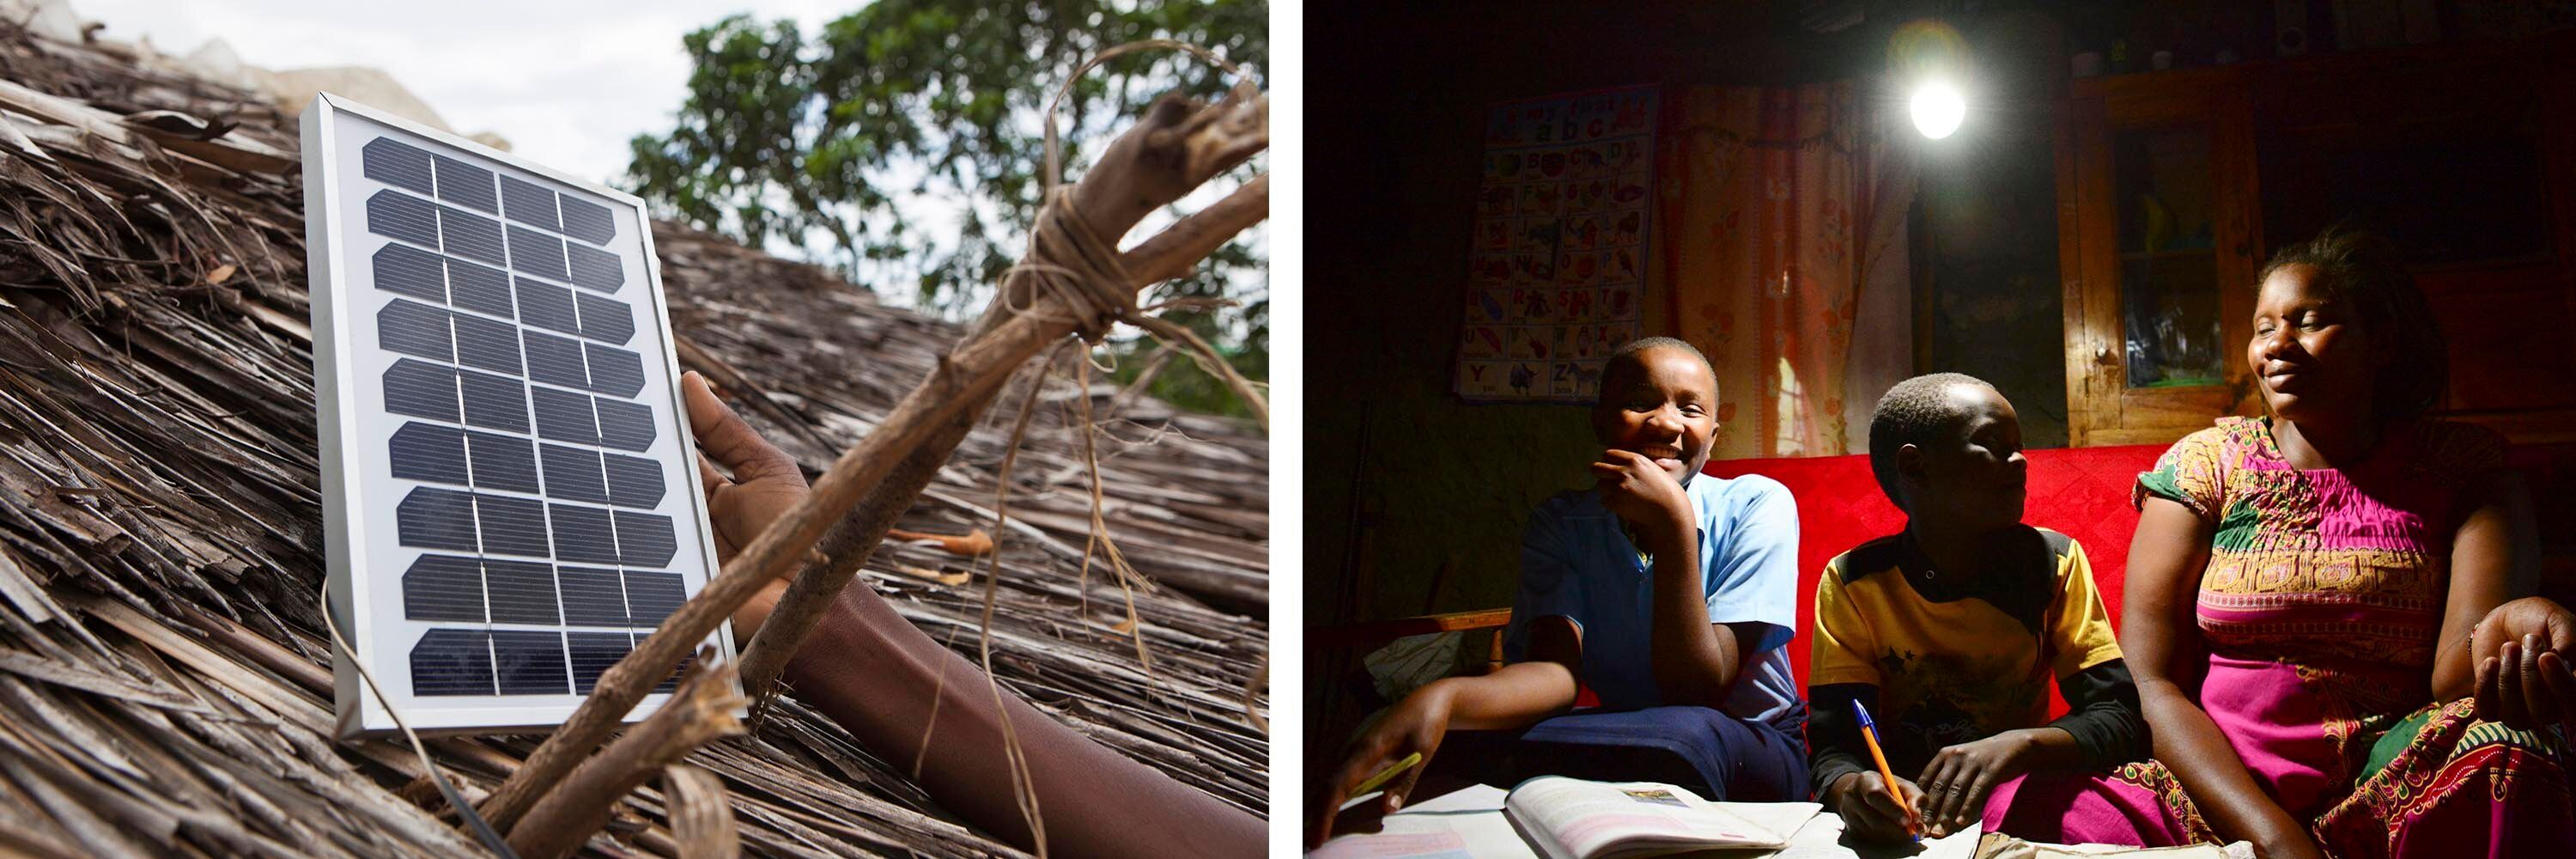 Left: A solar light is fitted onto a house near Nairobi, Kenya. Right: A family sits together under an LED bulb lit by a solar power generation kit in a rural area near Nairobi on Jan. 31, 2019. Credit: Getty Images